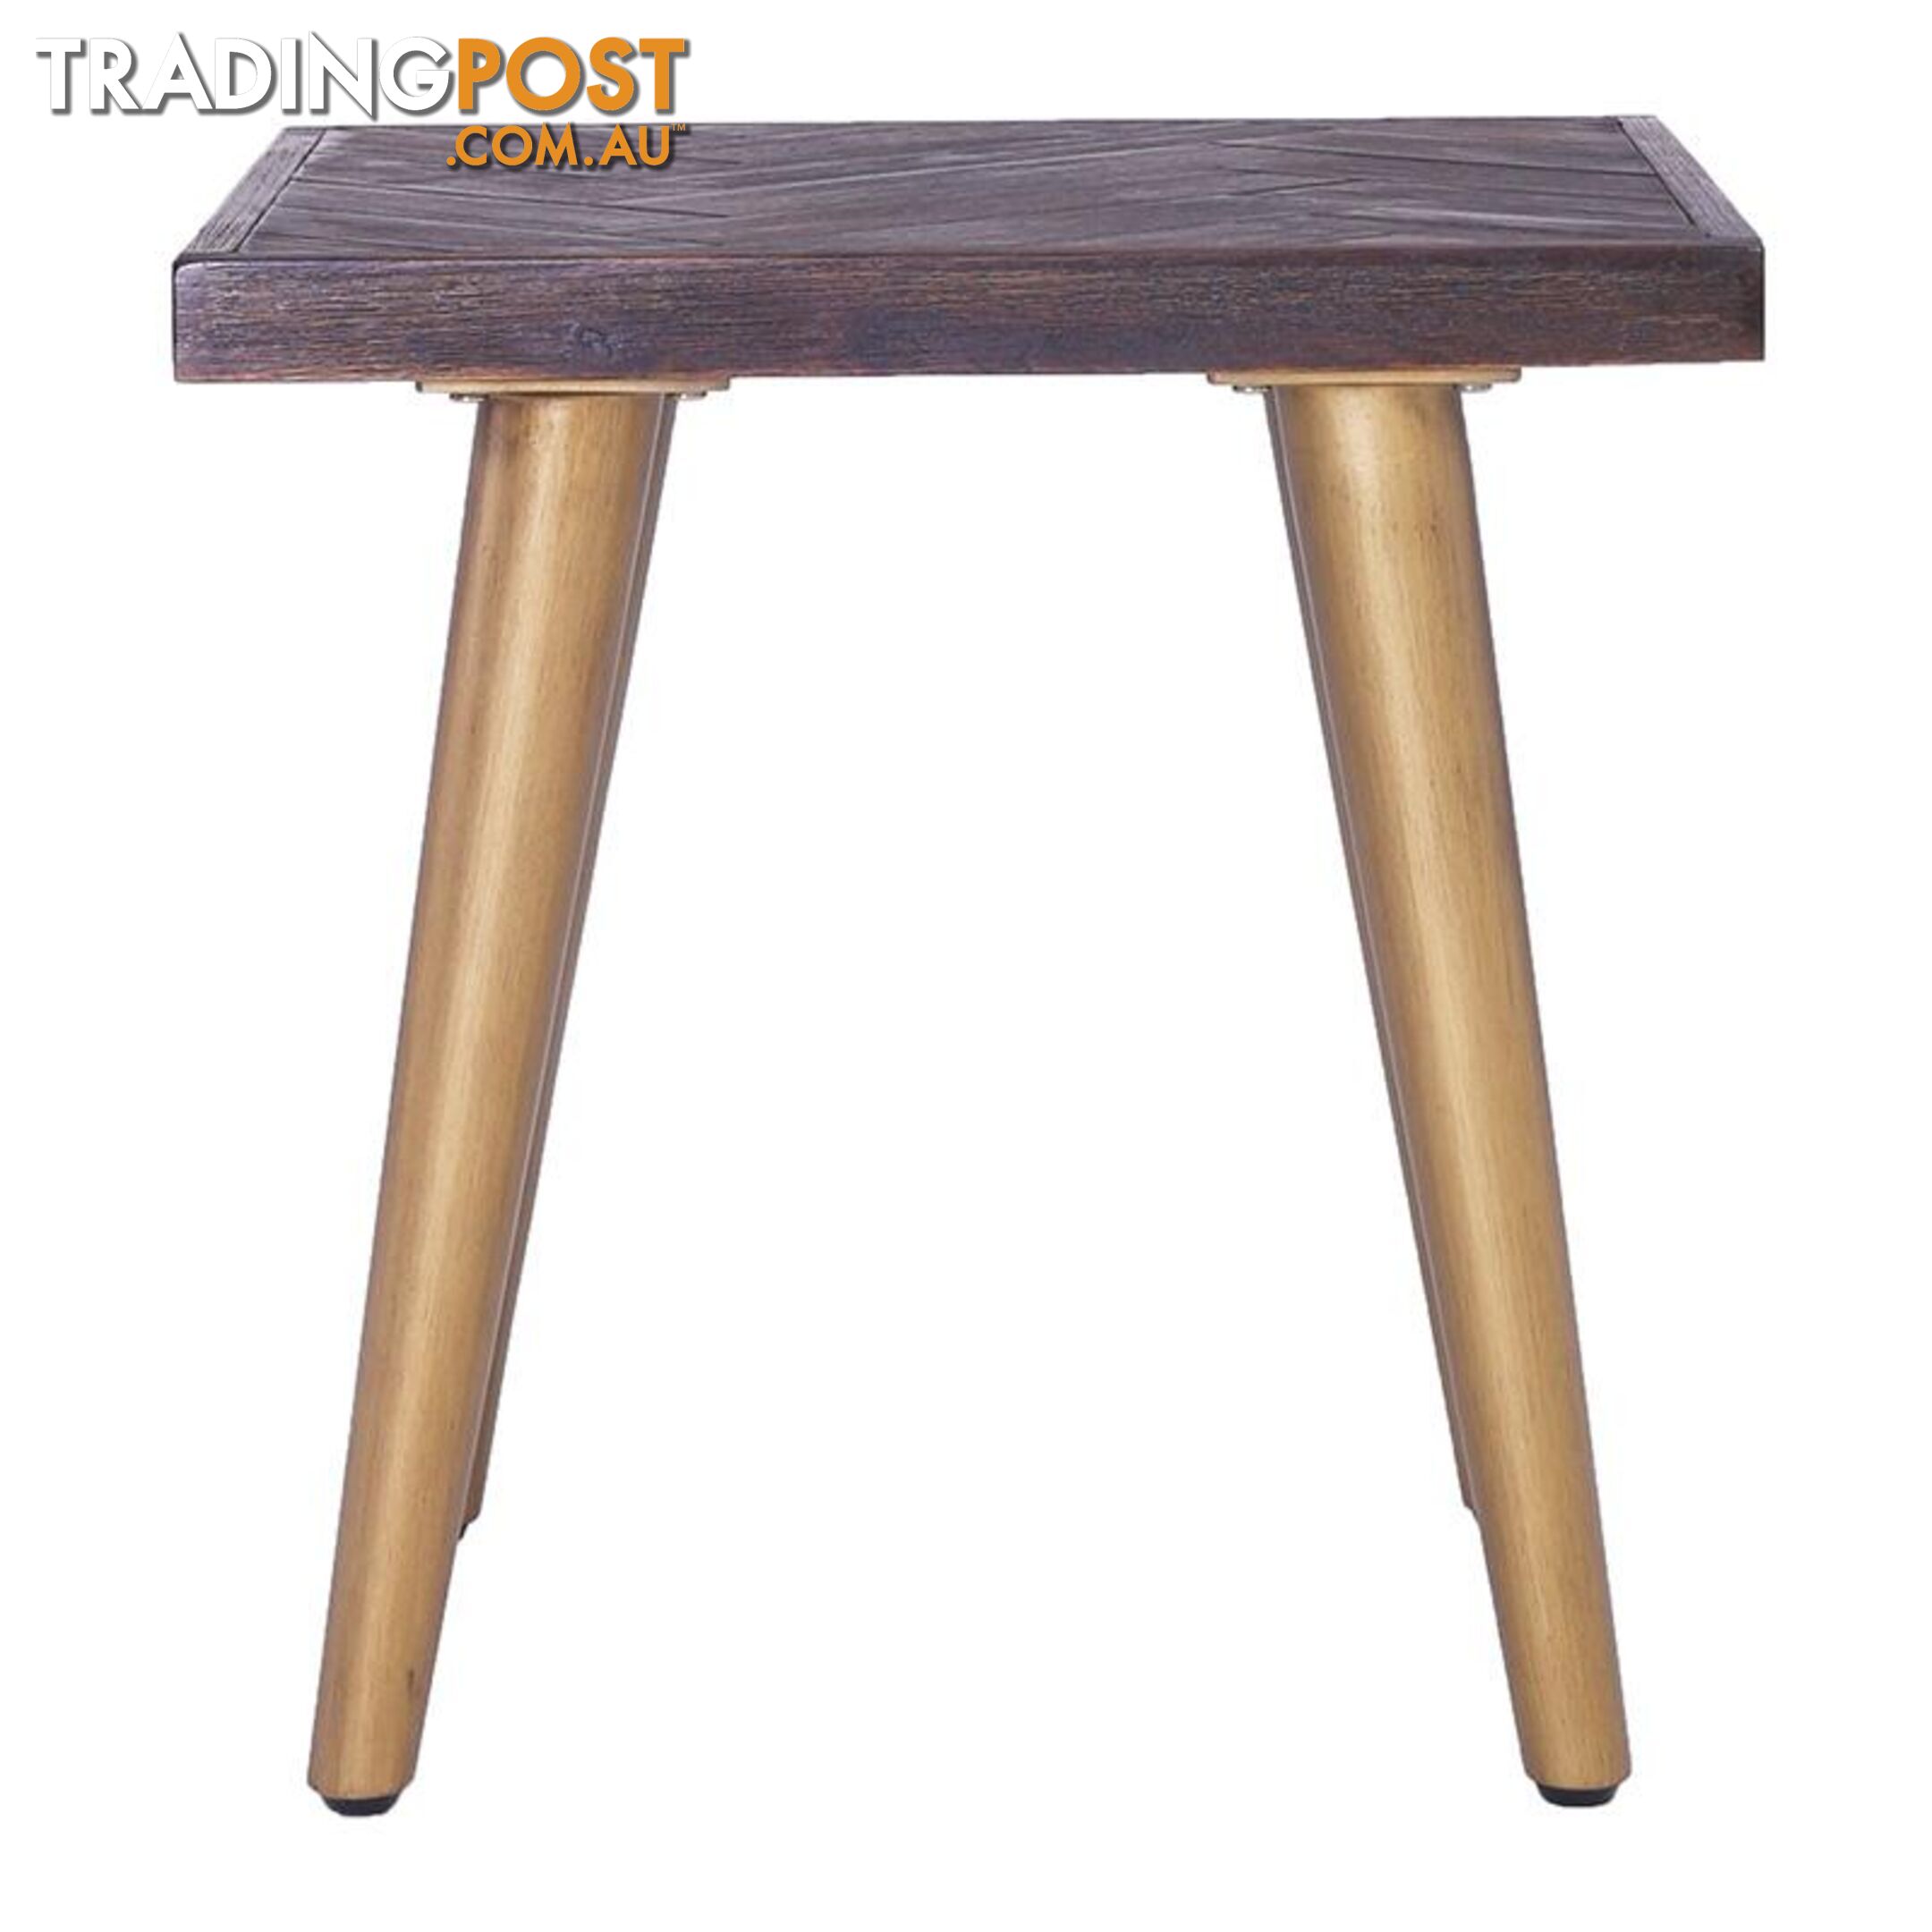 SIVAN Side Table 50x50cm Acacia Solid Wood - Brown - 131030 - 9334719004815